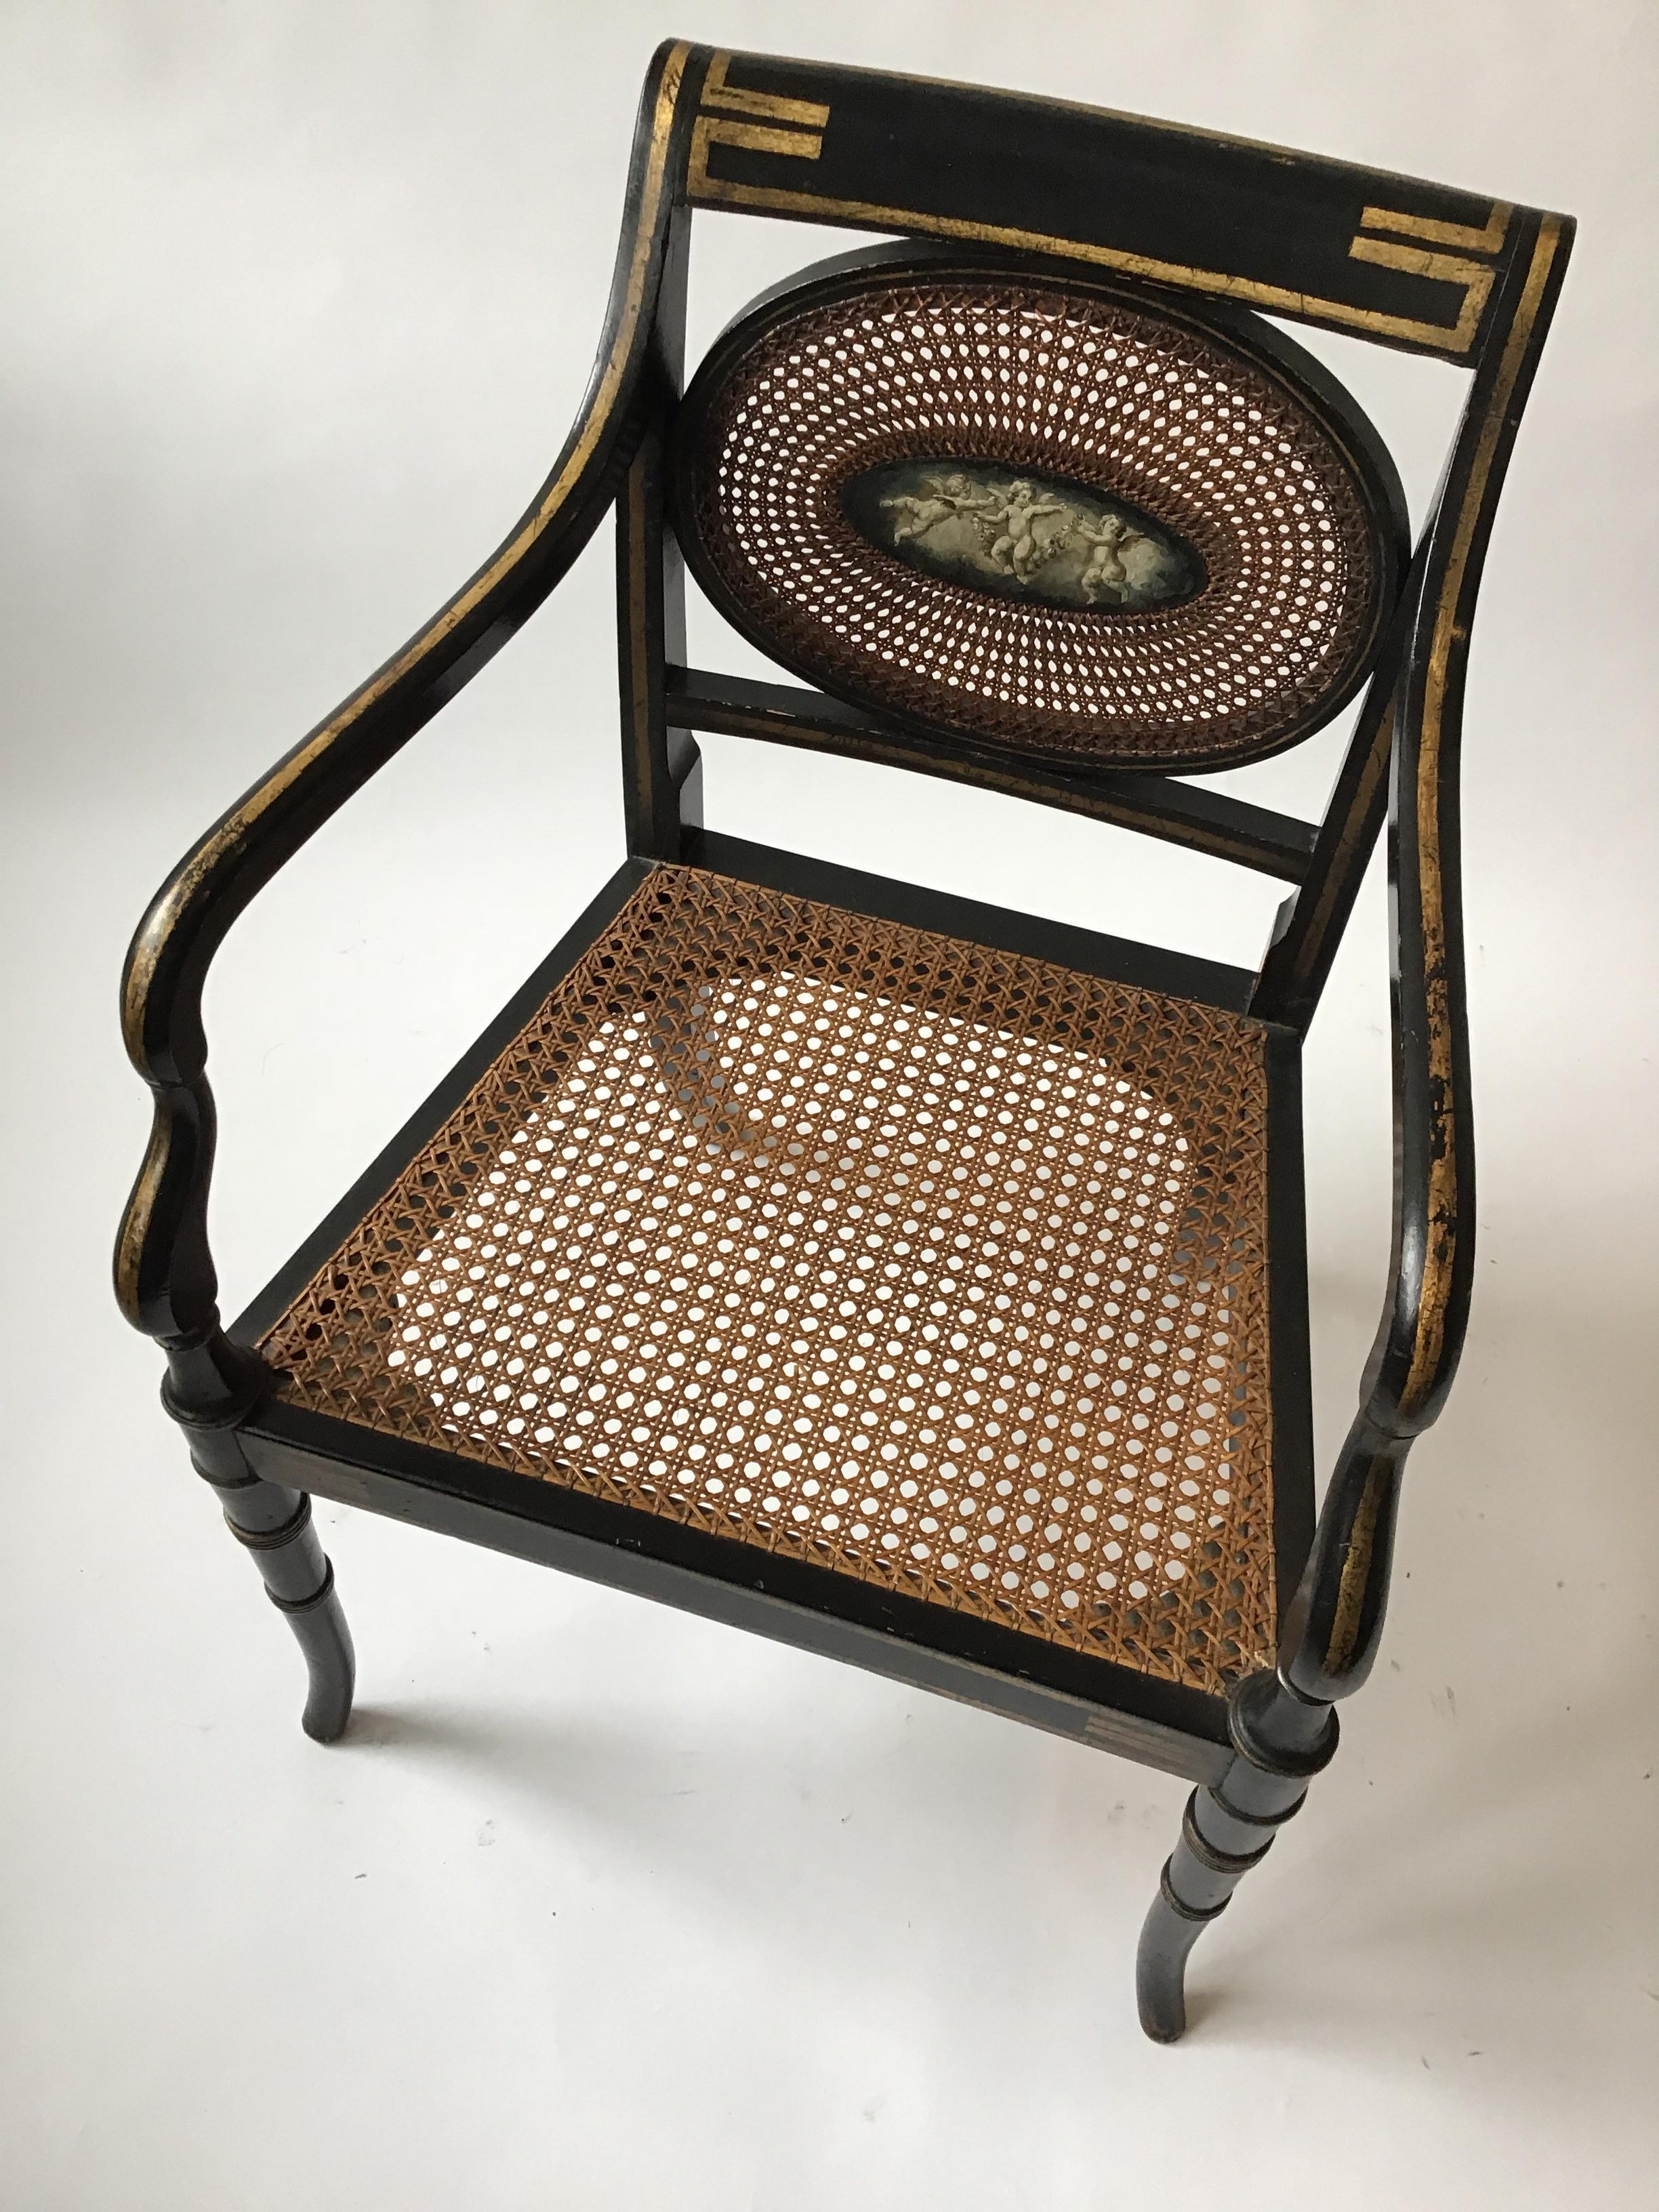 1910 Sheraton style hand caned armchair with hand painted cherub plaque.